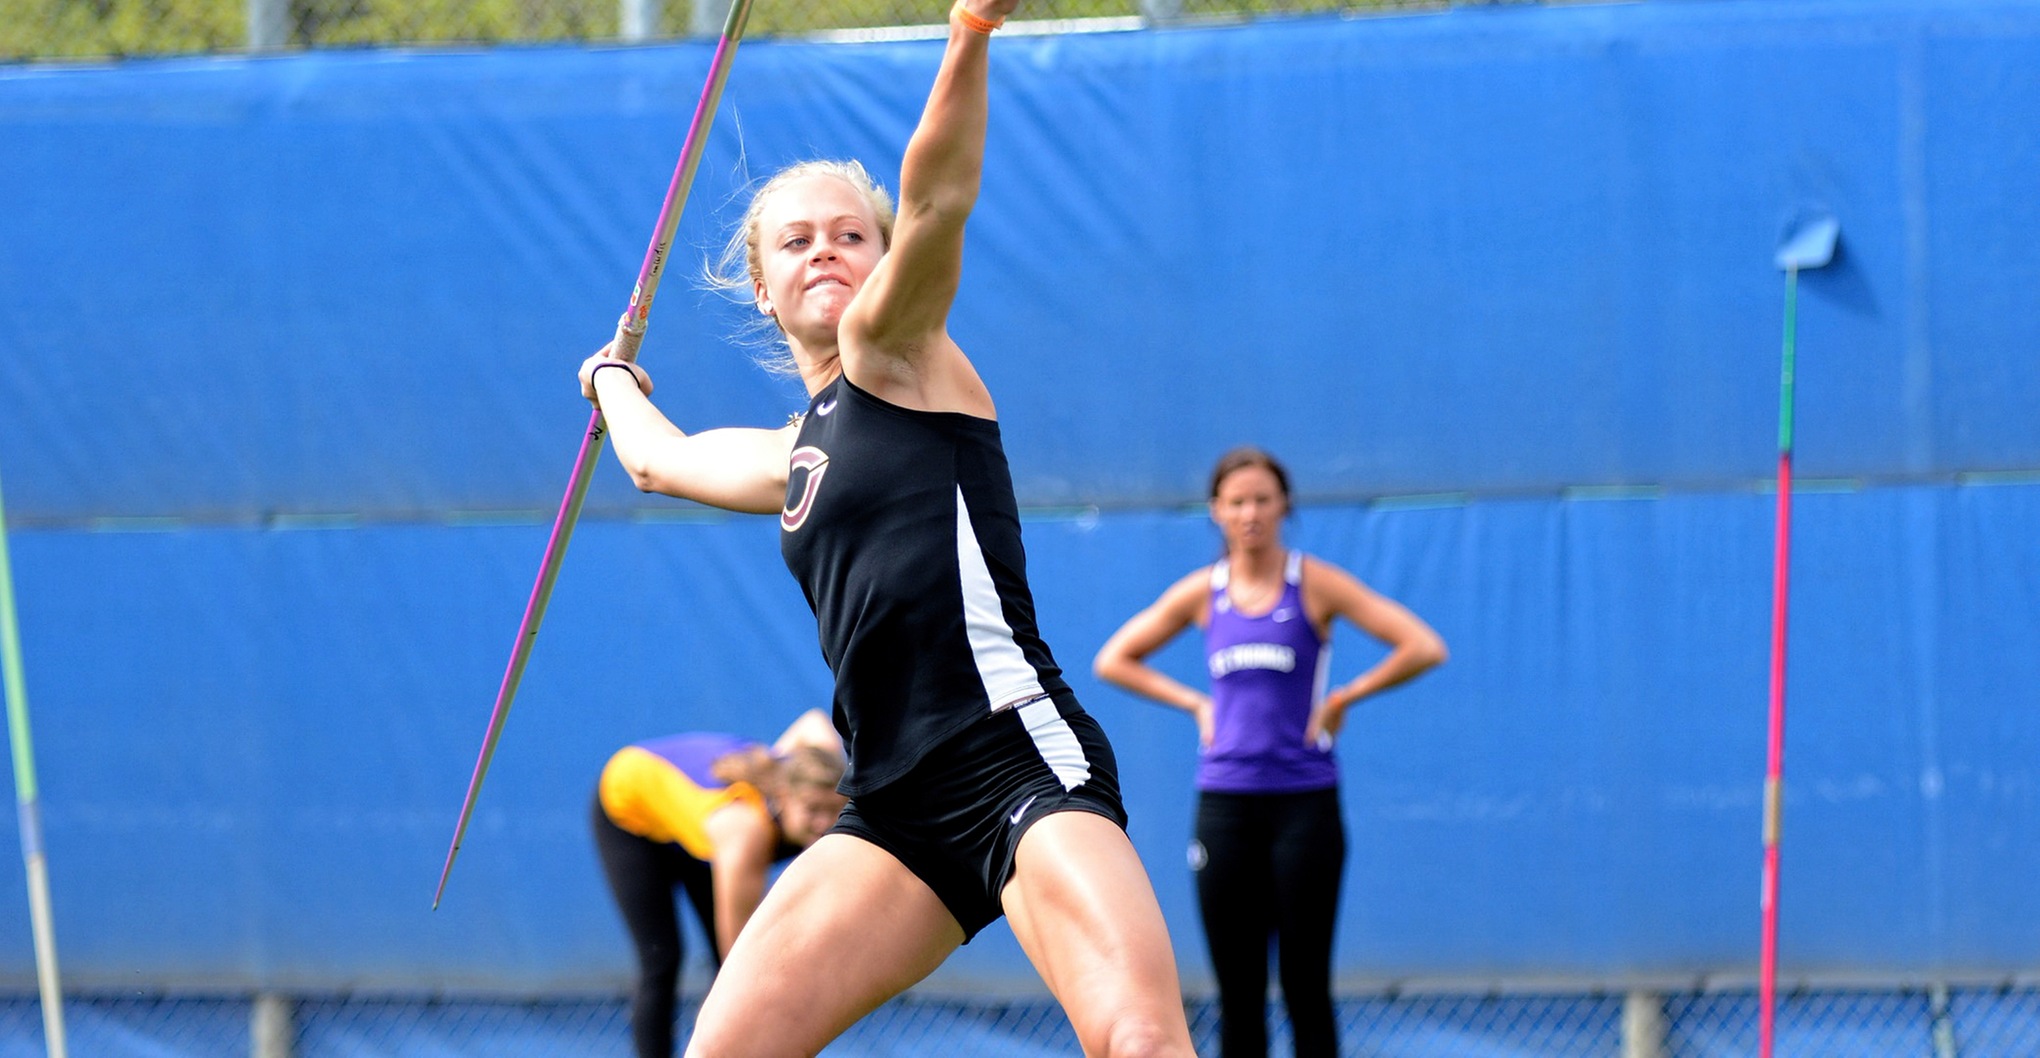 Senior Mikayla Forness kicked off the outdoor season by winning the javelin competition at the St. Benedict Outdoor Invitational.